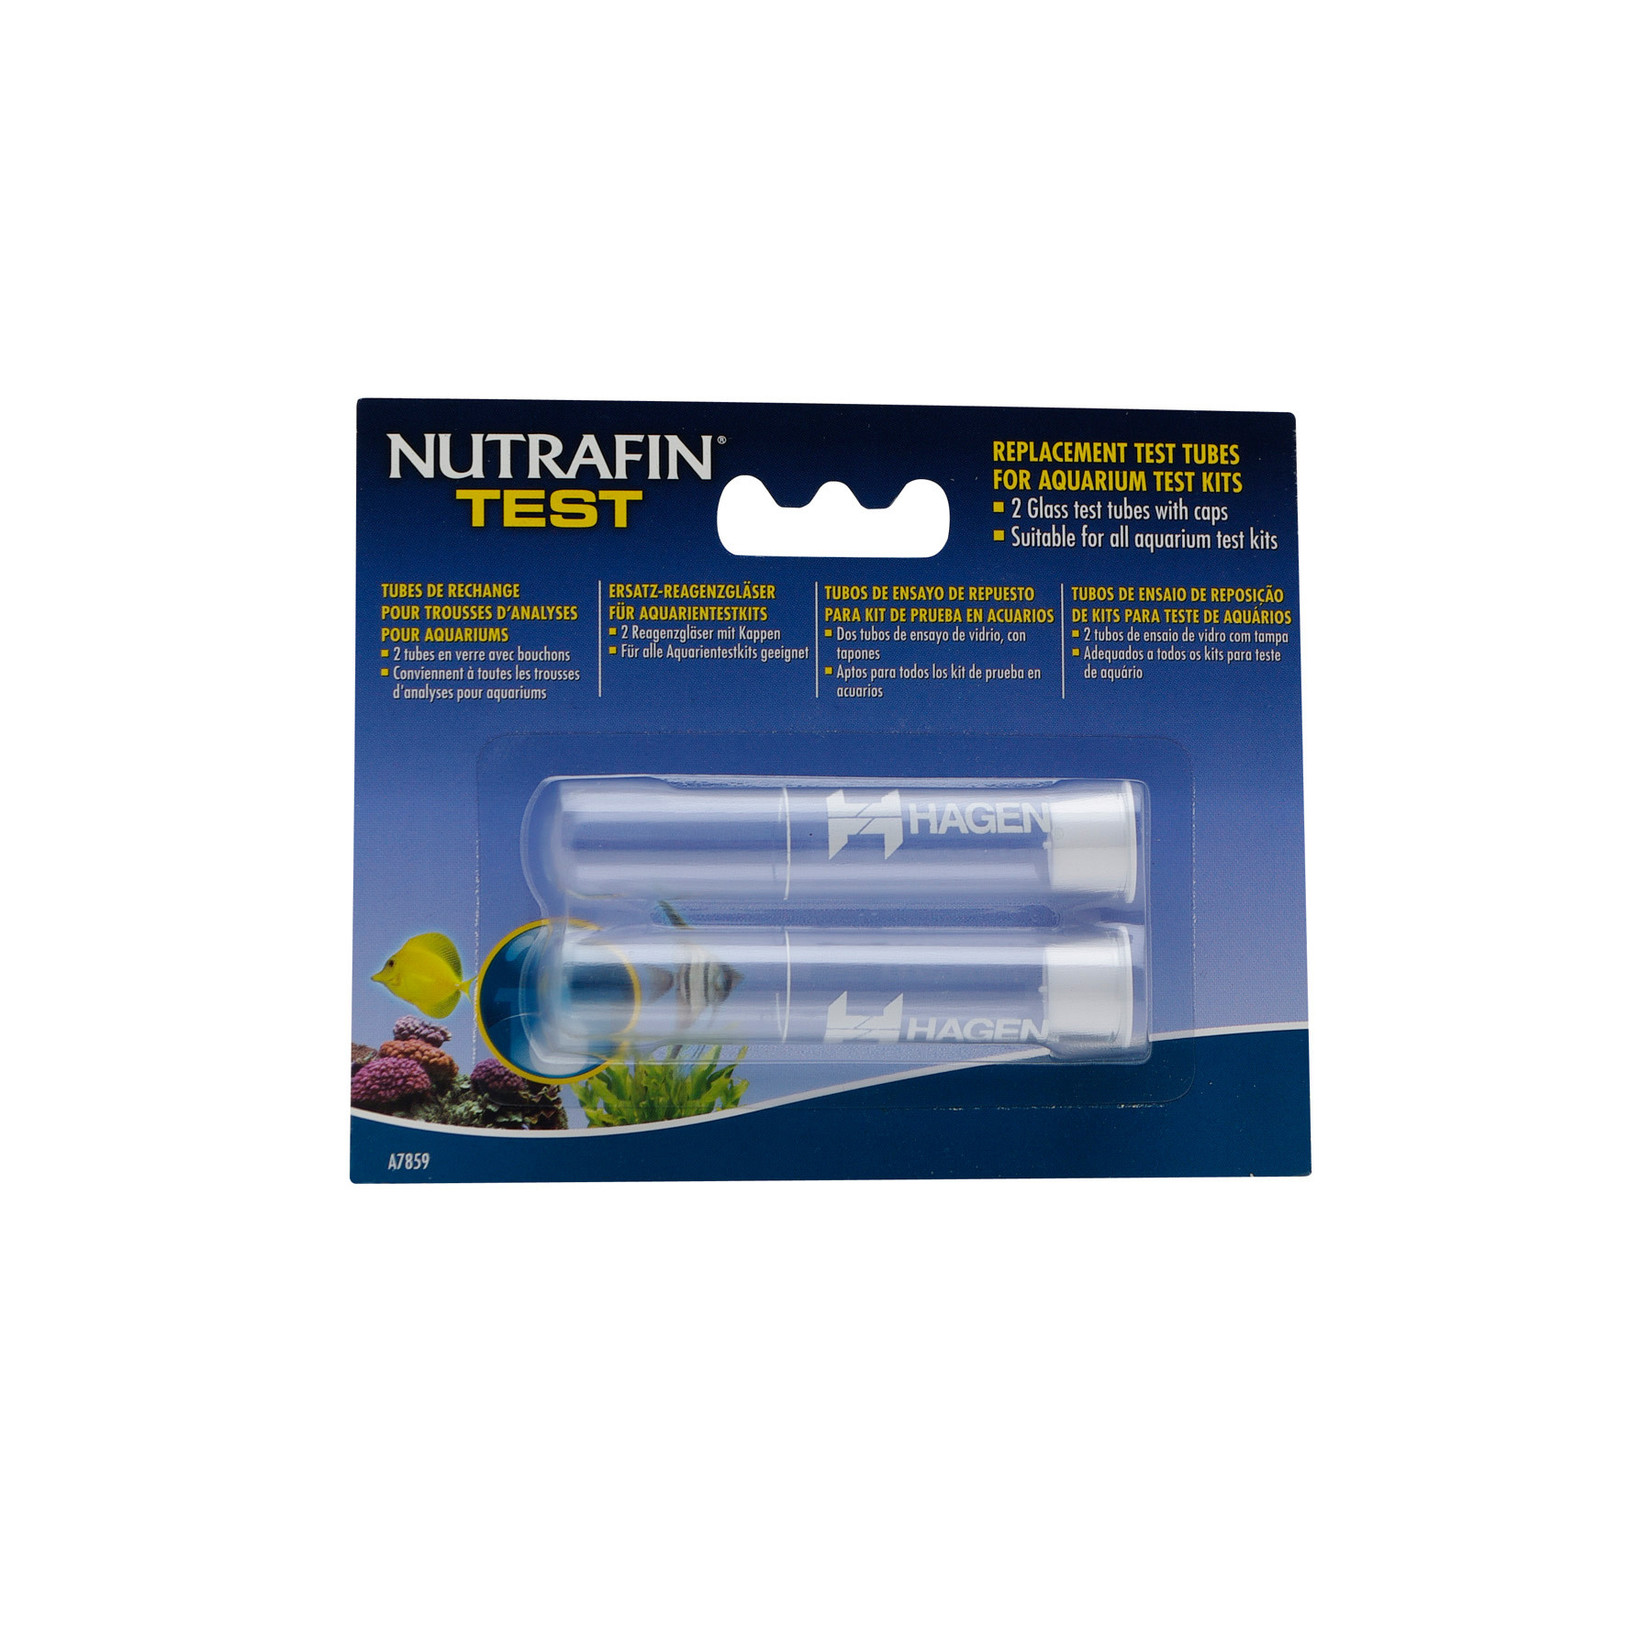 MARINA (W) Nutrafin Replacement Test Tubes 2 pack